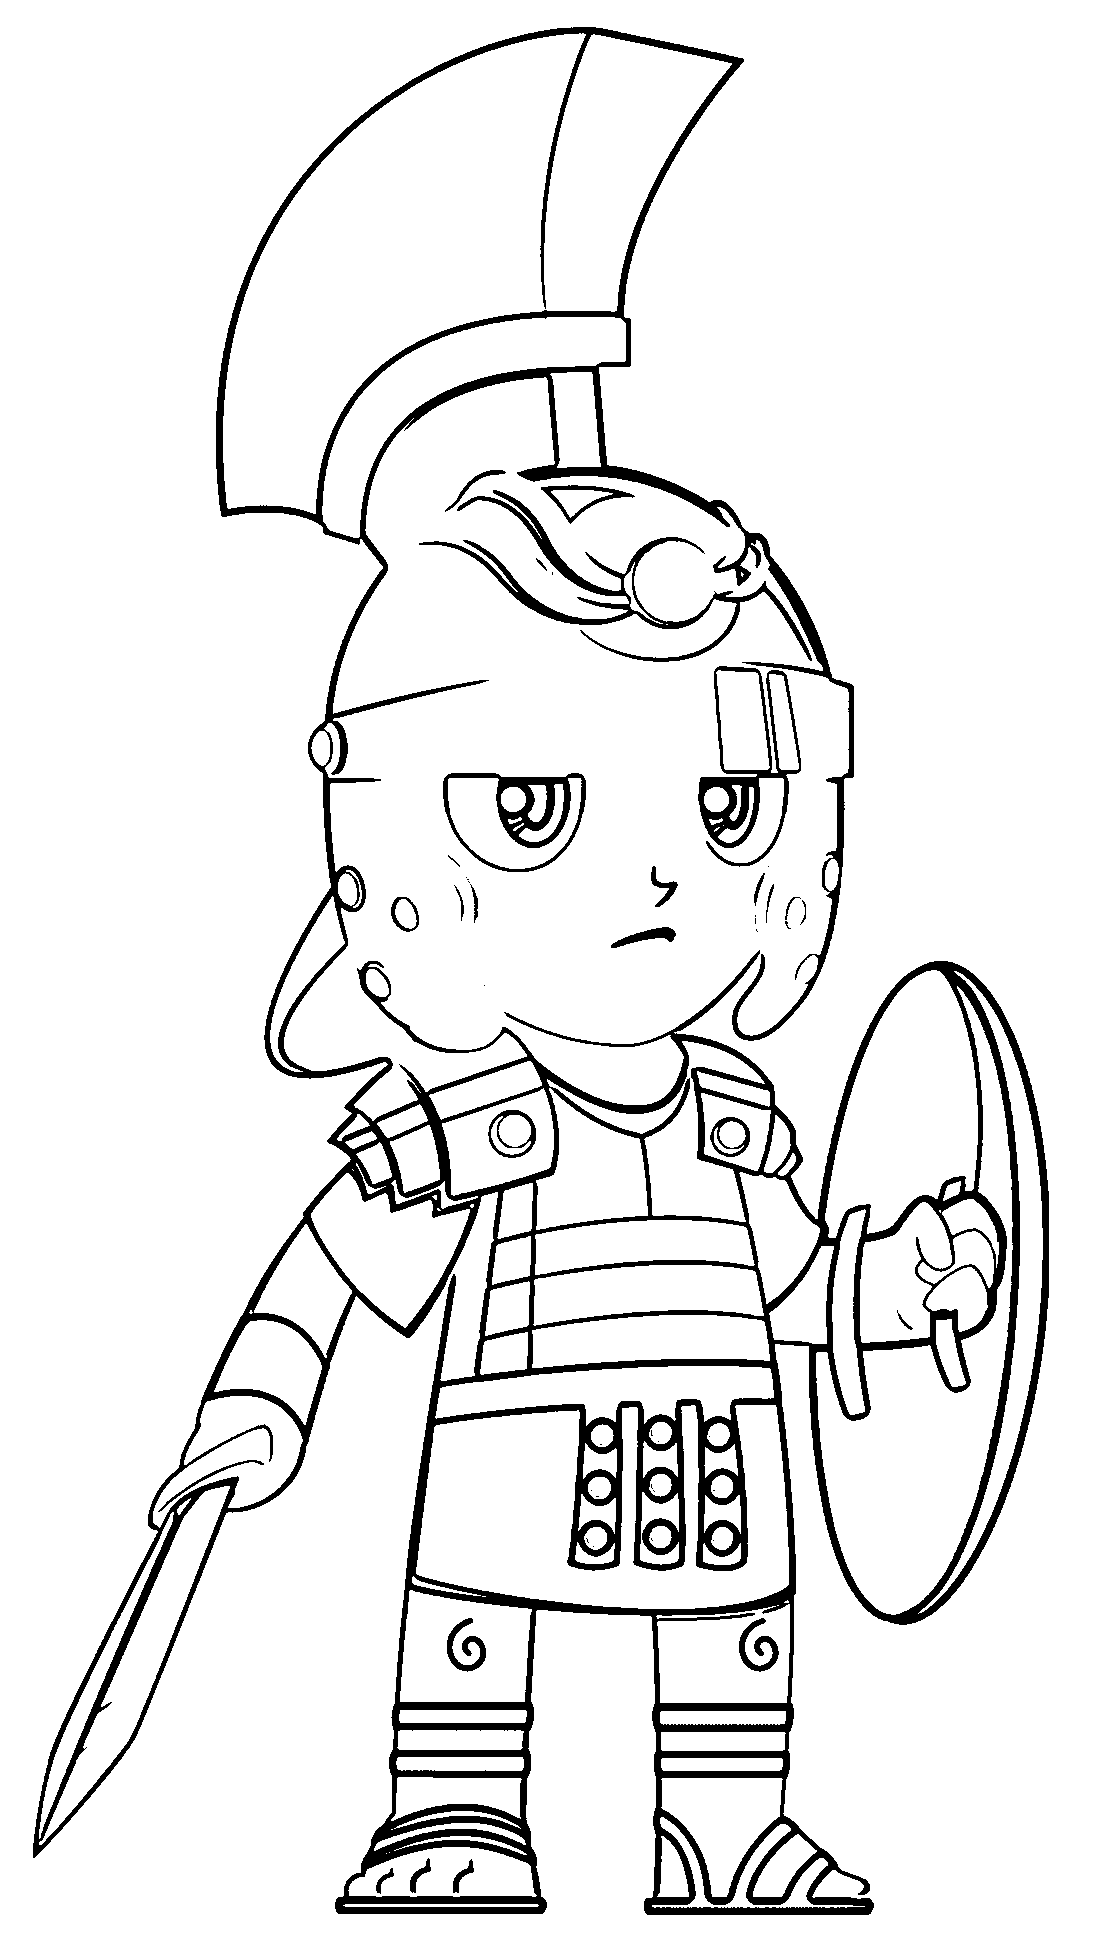 Cartoon Roman Soldier Pictures Coloring Page | Wecoloringpage